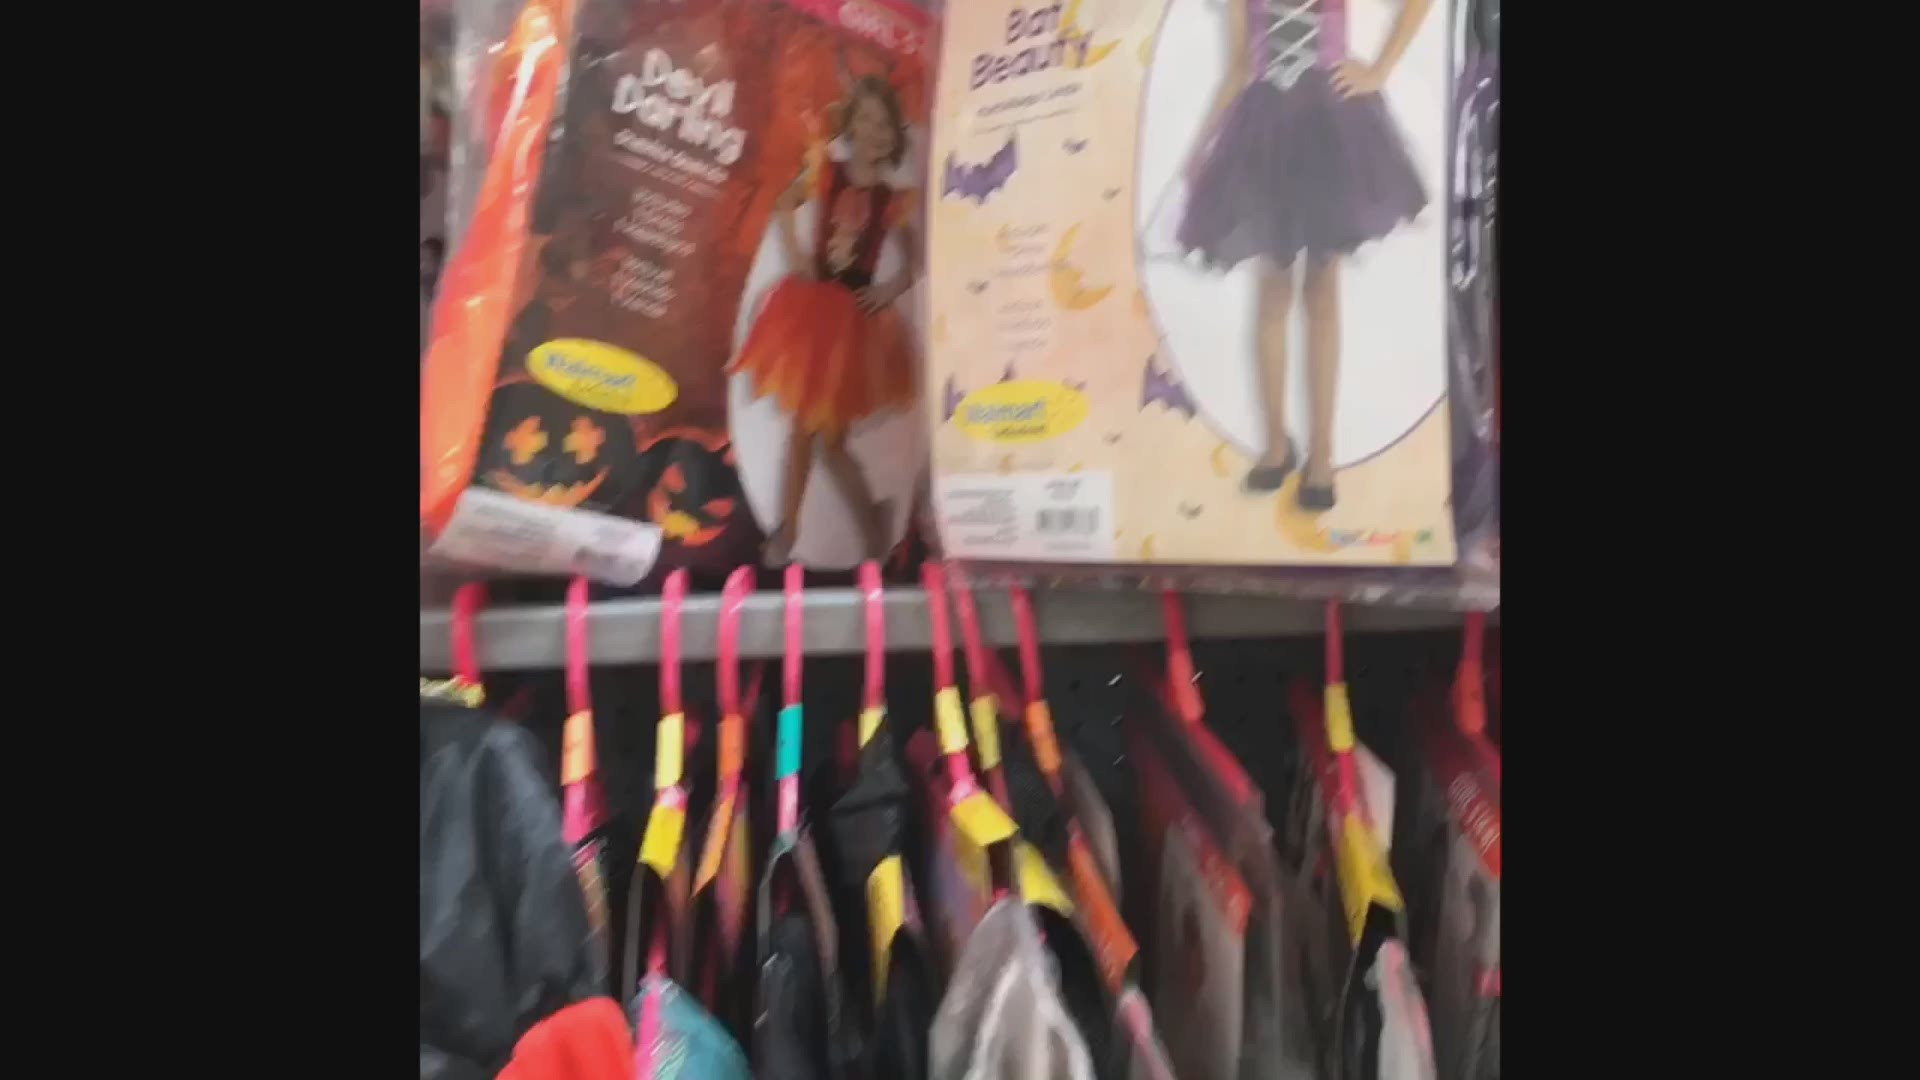 Walmart has affordable costumes for EVERYONE this Halloween season